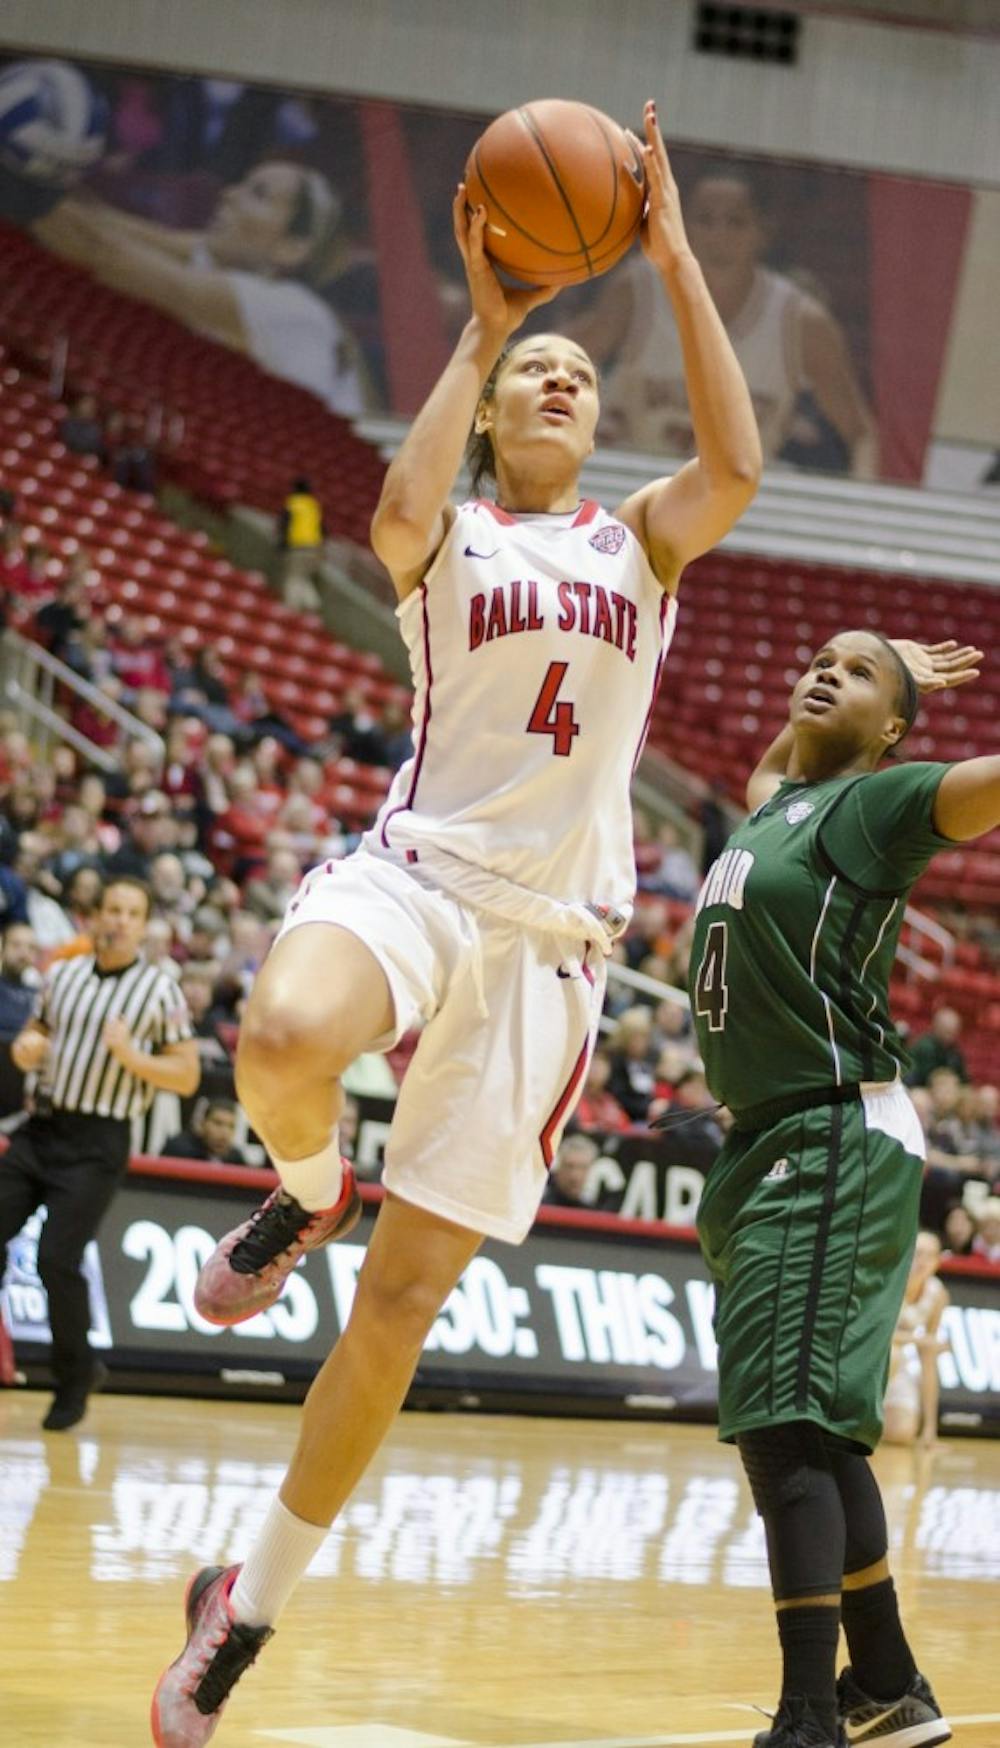 PREVIEW: Contrasting styles to be displayed when Ball State women's basketball takes on Ohio